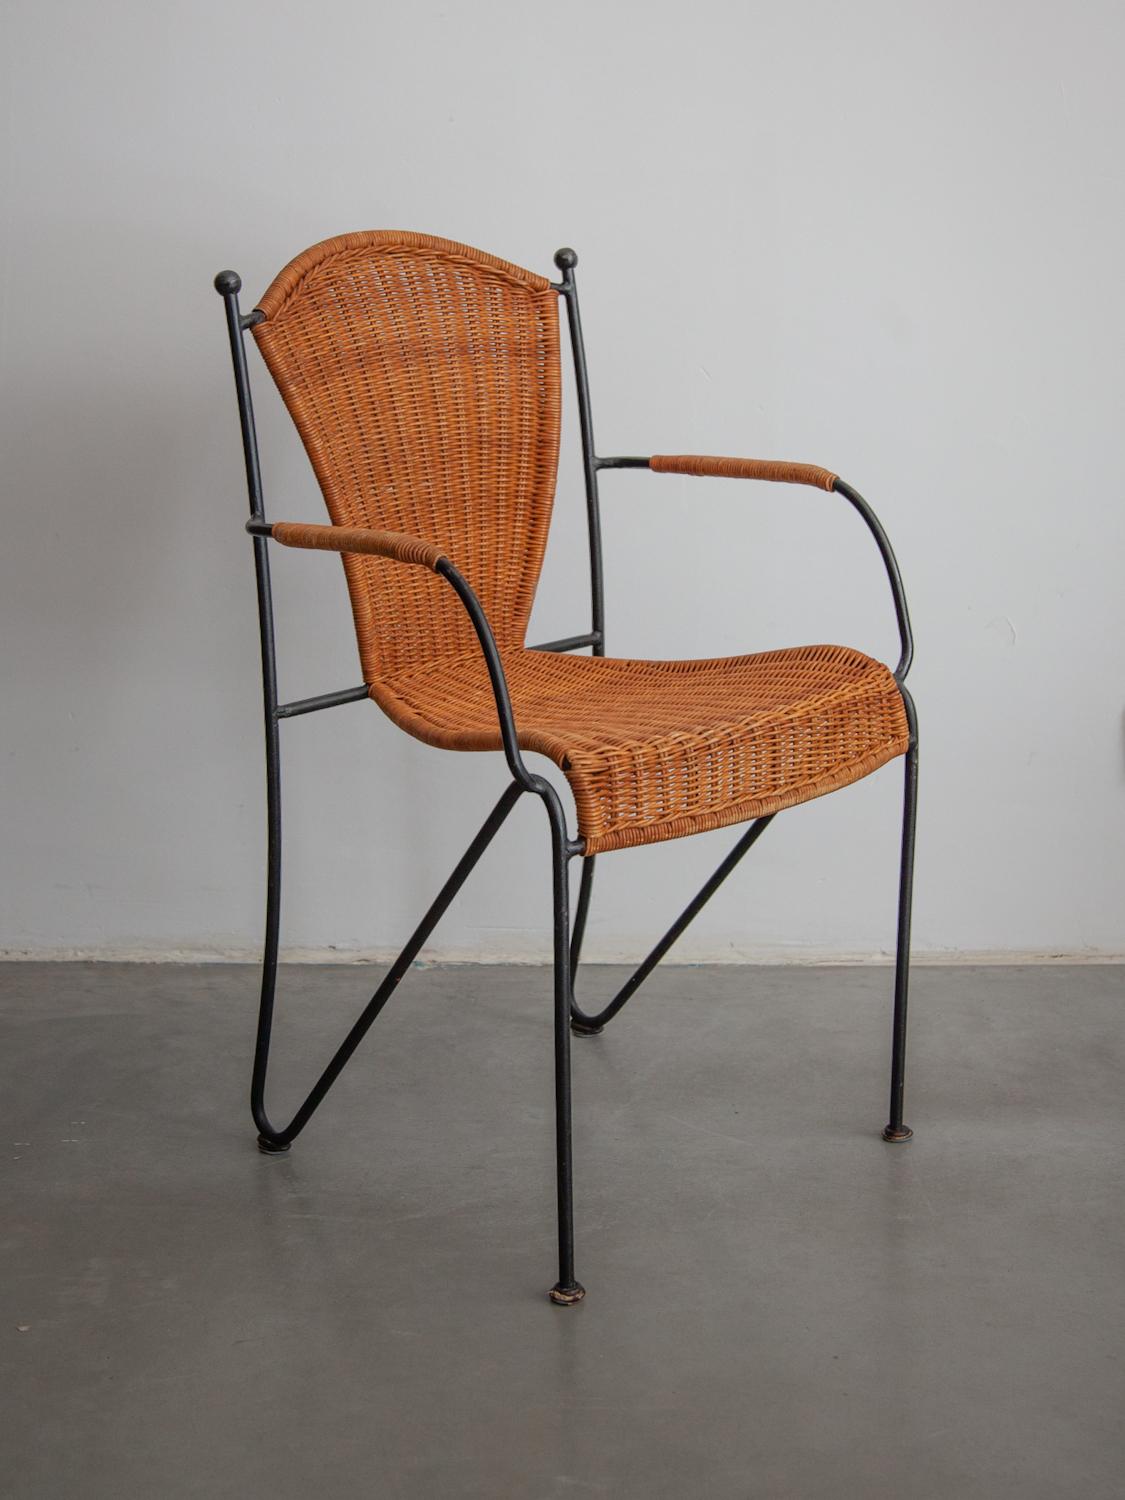 Six Iron and Rattan Indoor and Outdoor Patio Chairs by Pipsan Saarinen Swanson 7